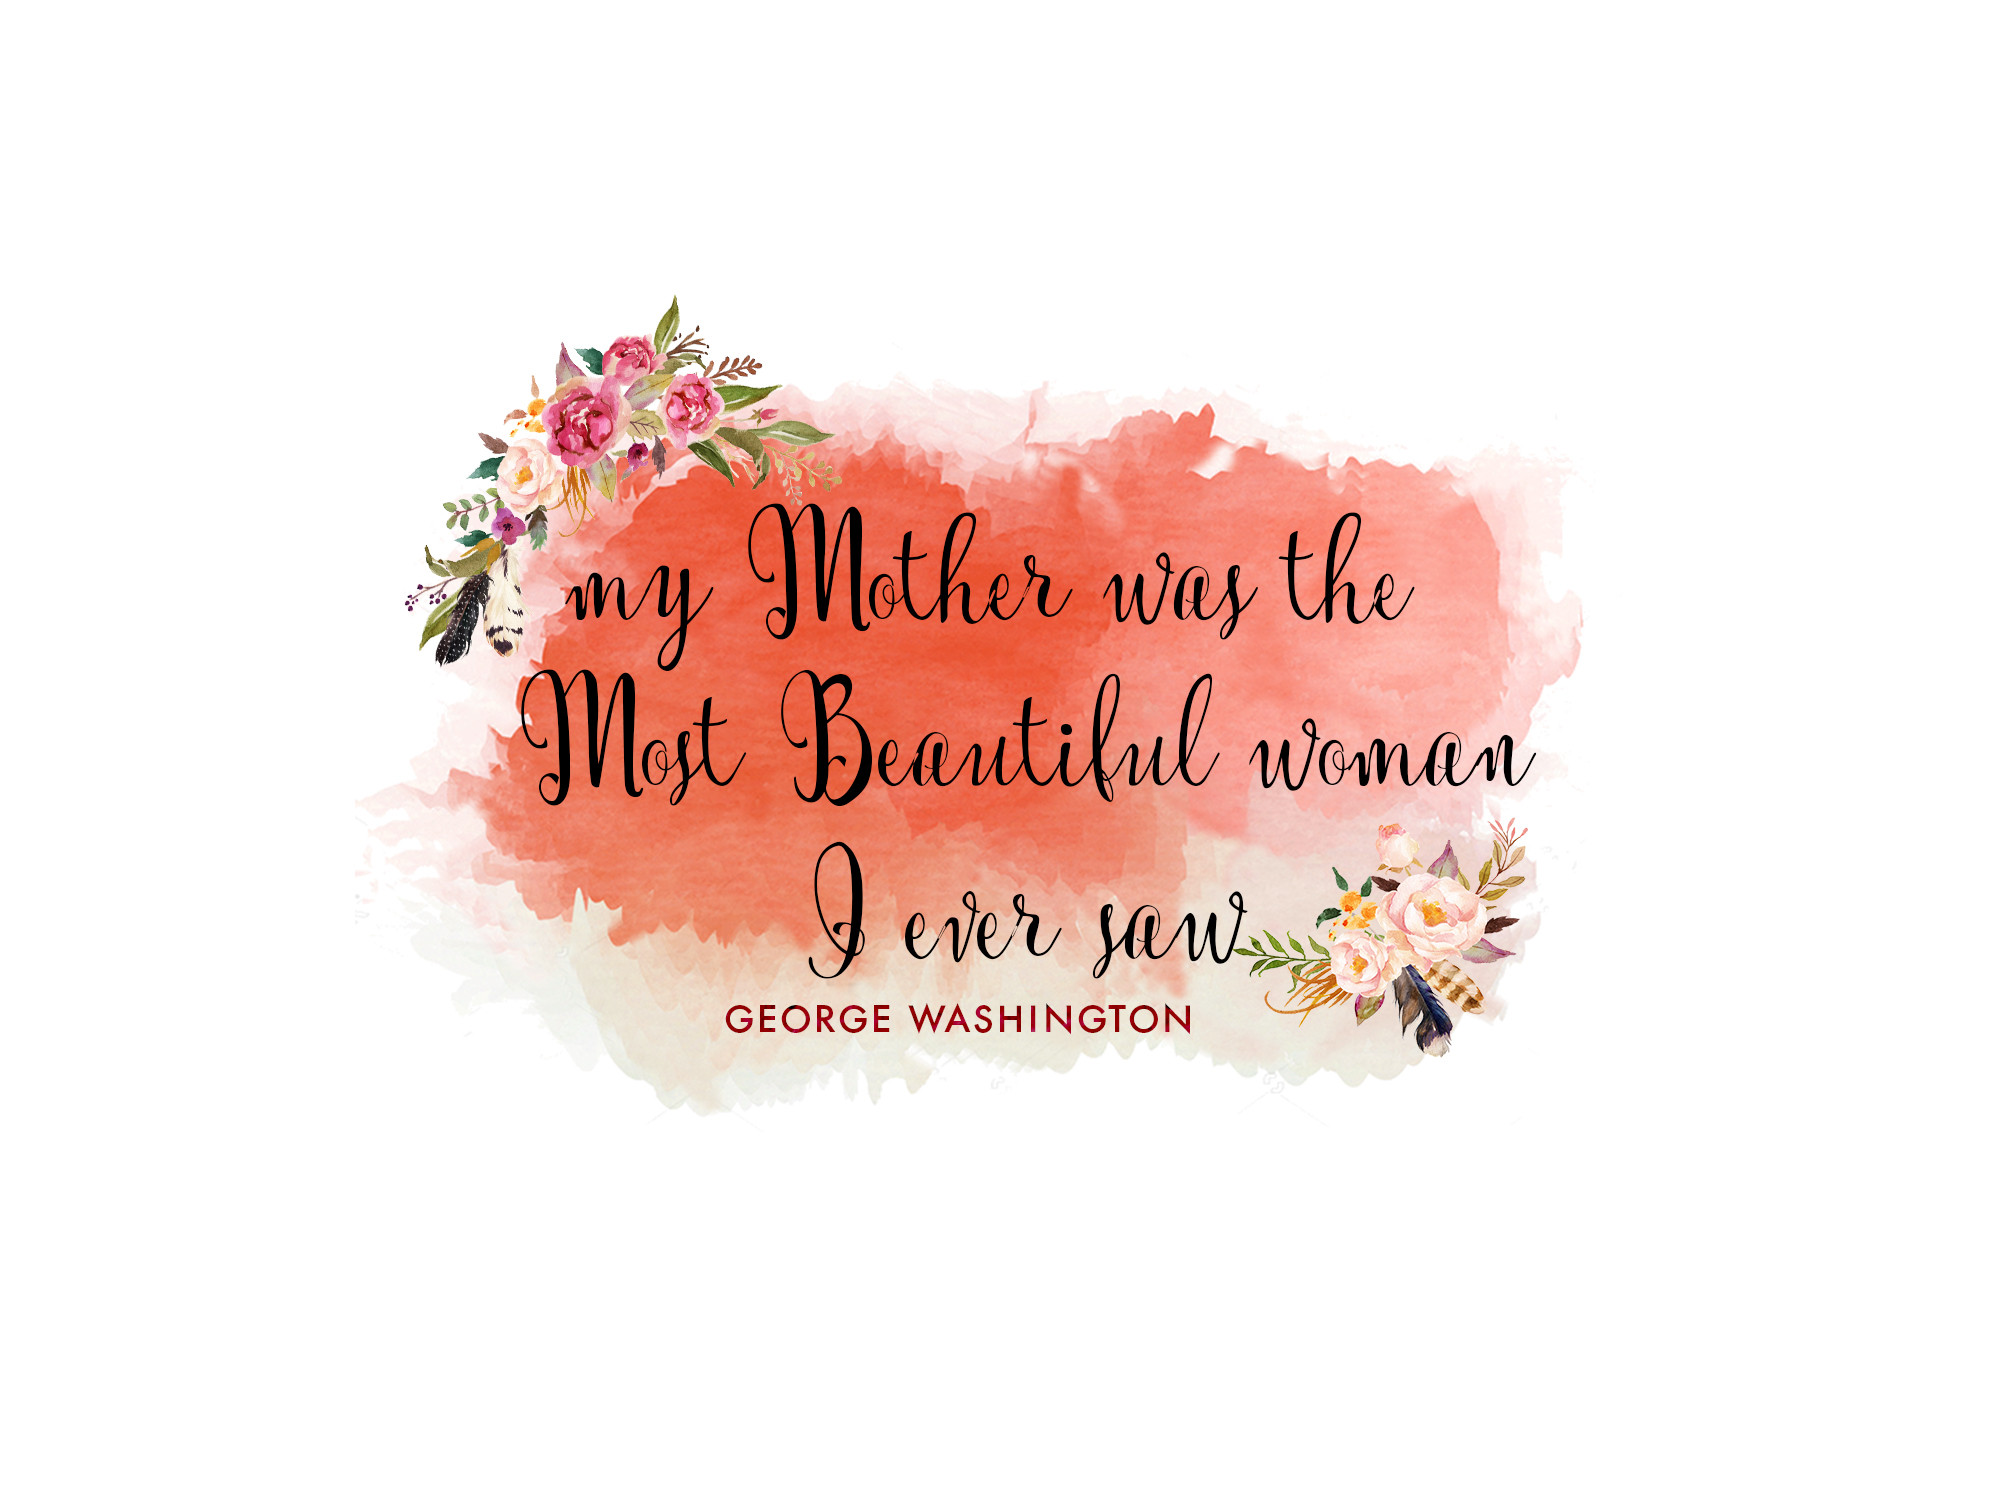 Quote Mothers Day
 Mother s Day Quotes Slogans Quotations & Sayings 2019